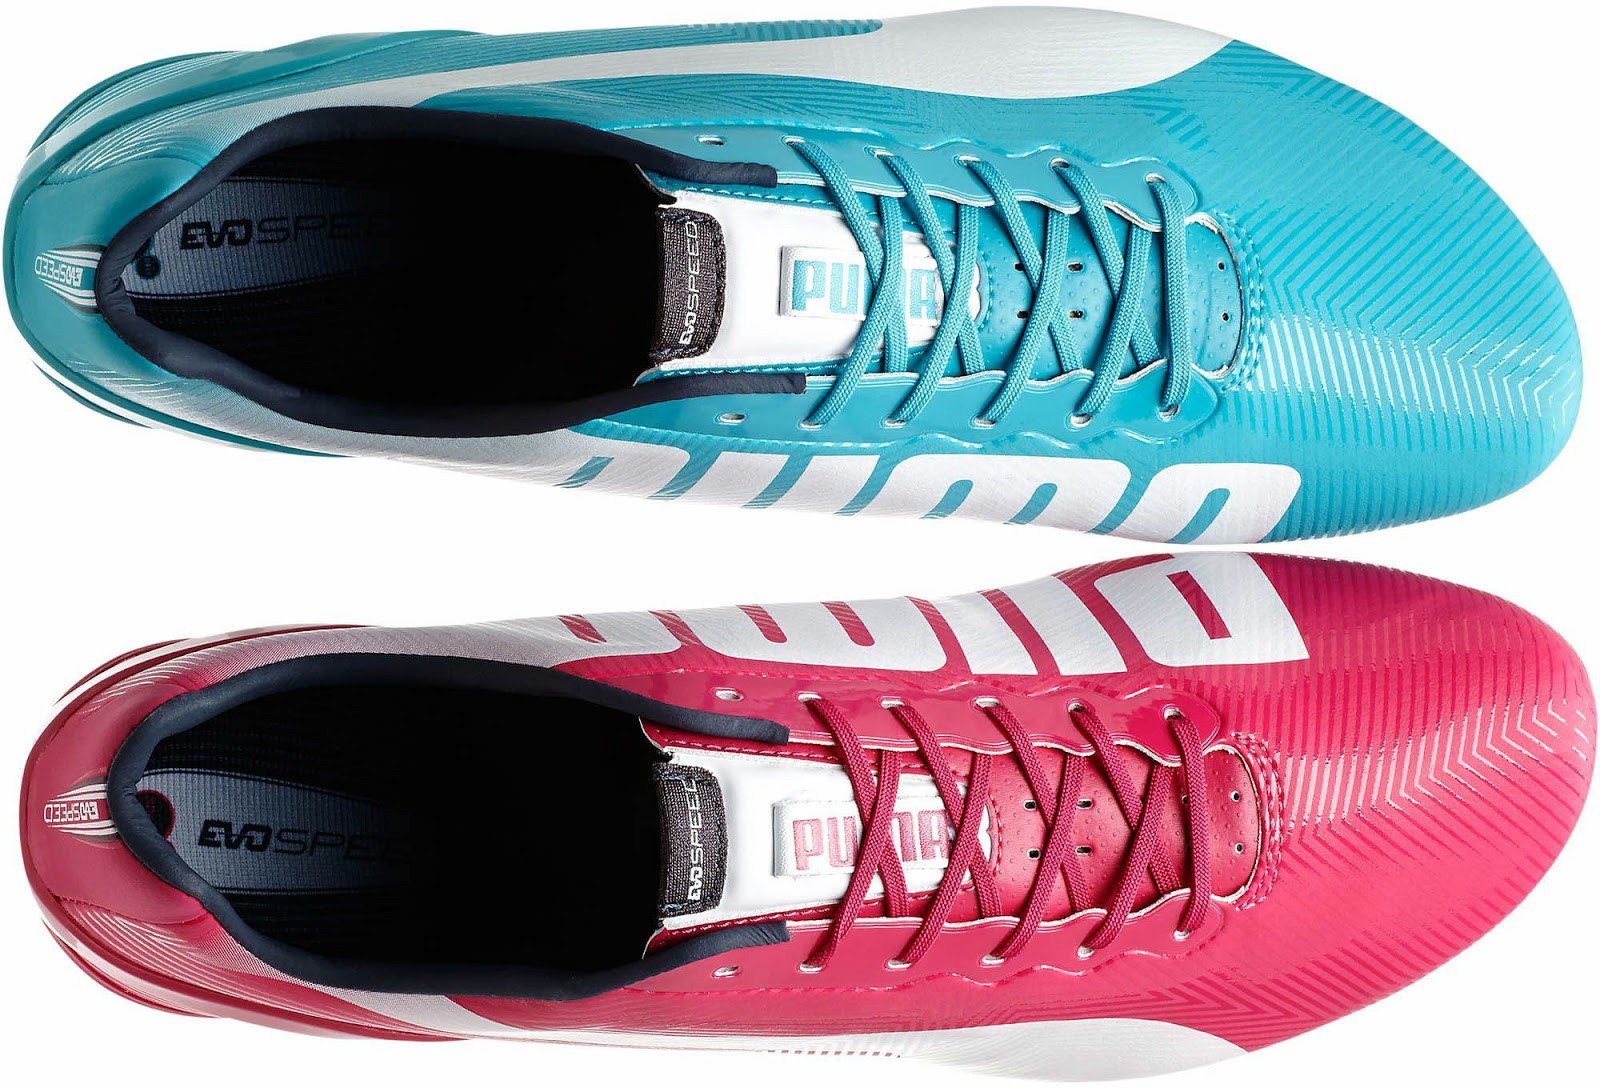 evoSPEED 1.2 2014 World Cup Boots - Differently Colored Boots! - Footy Headlines